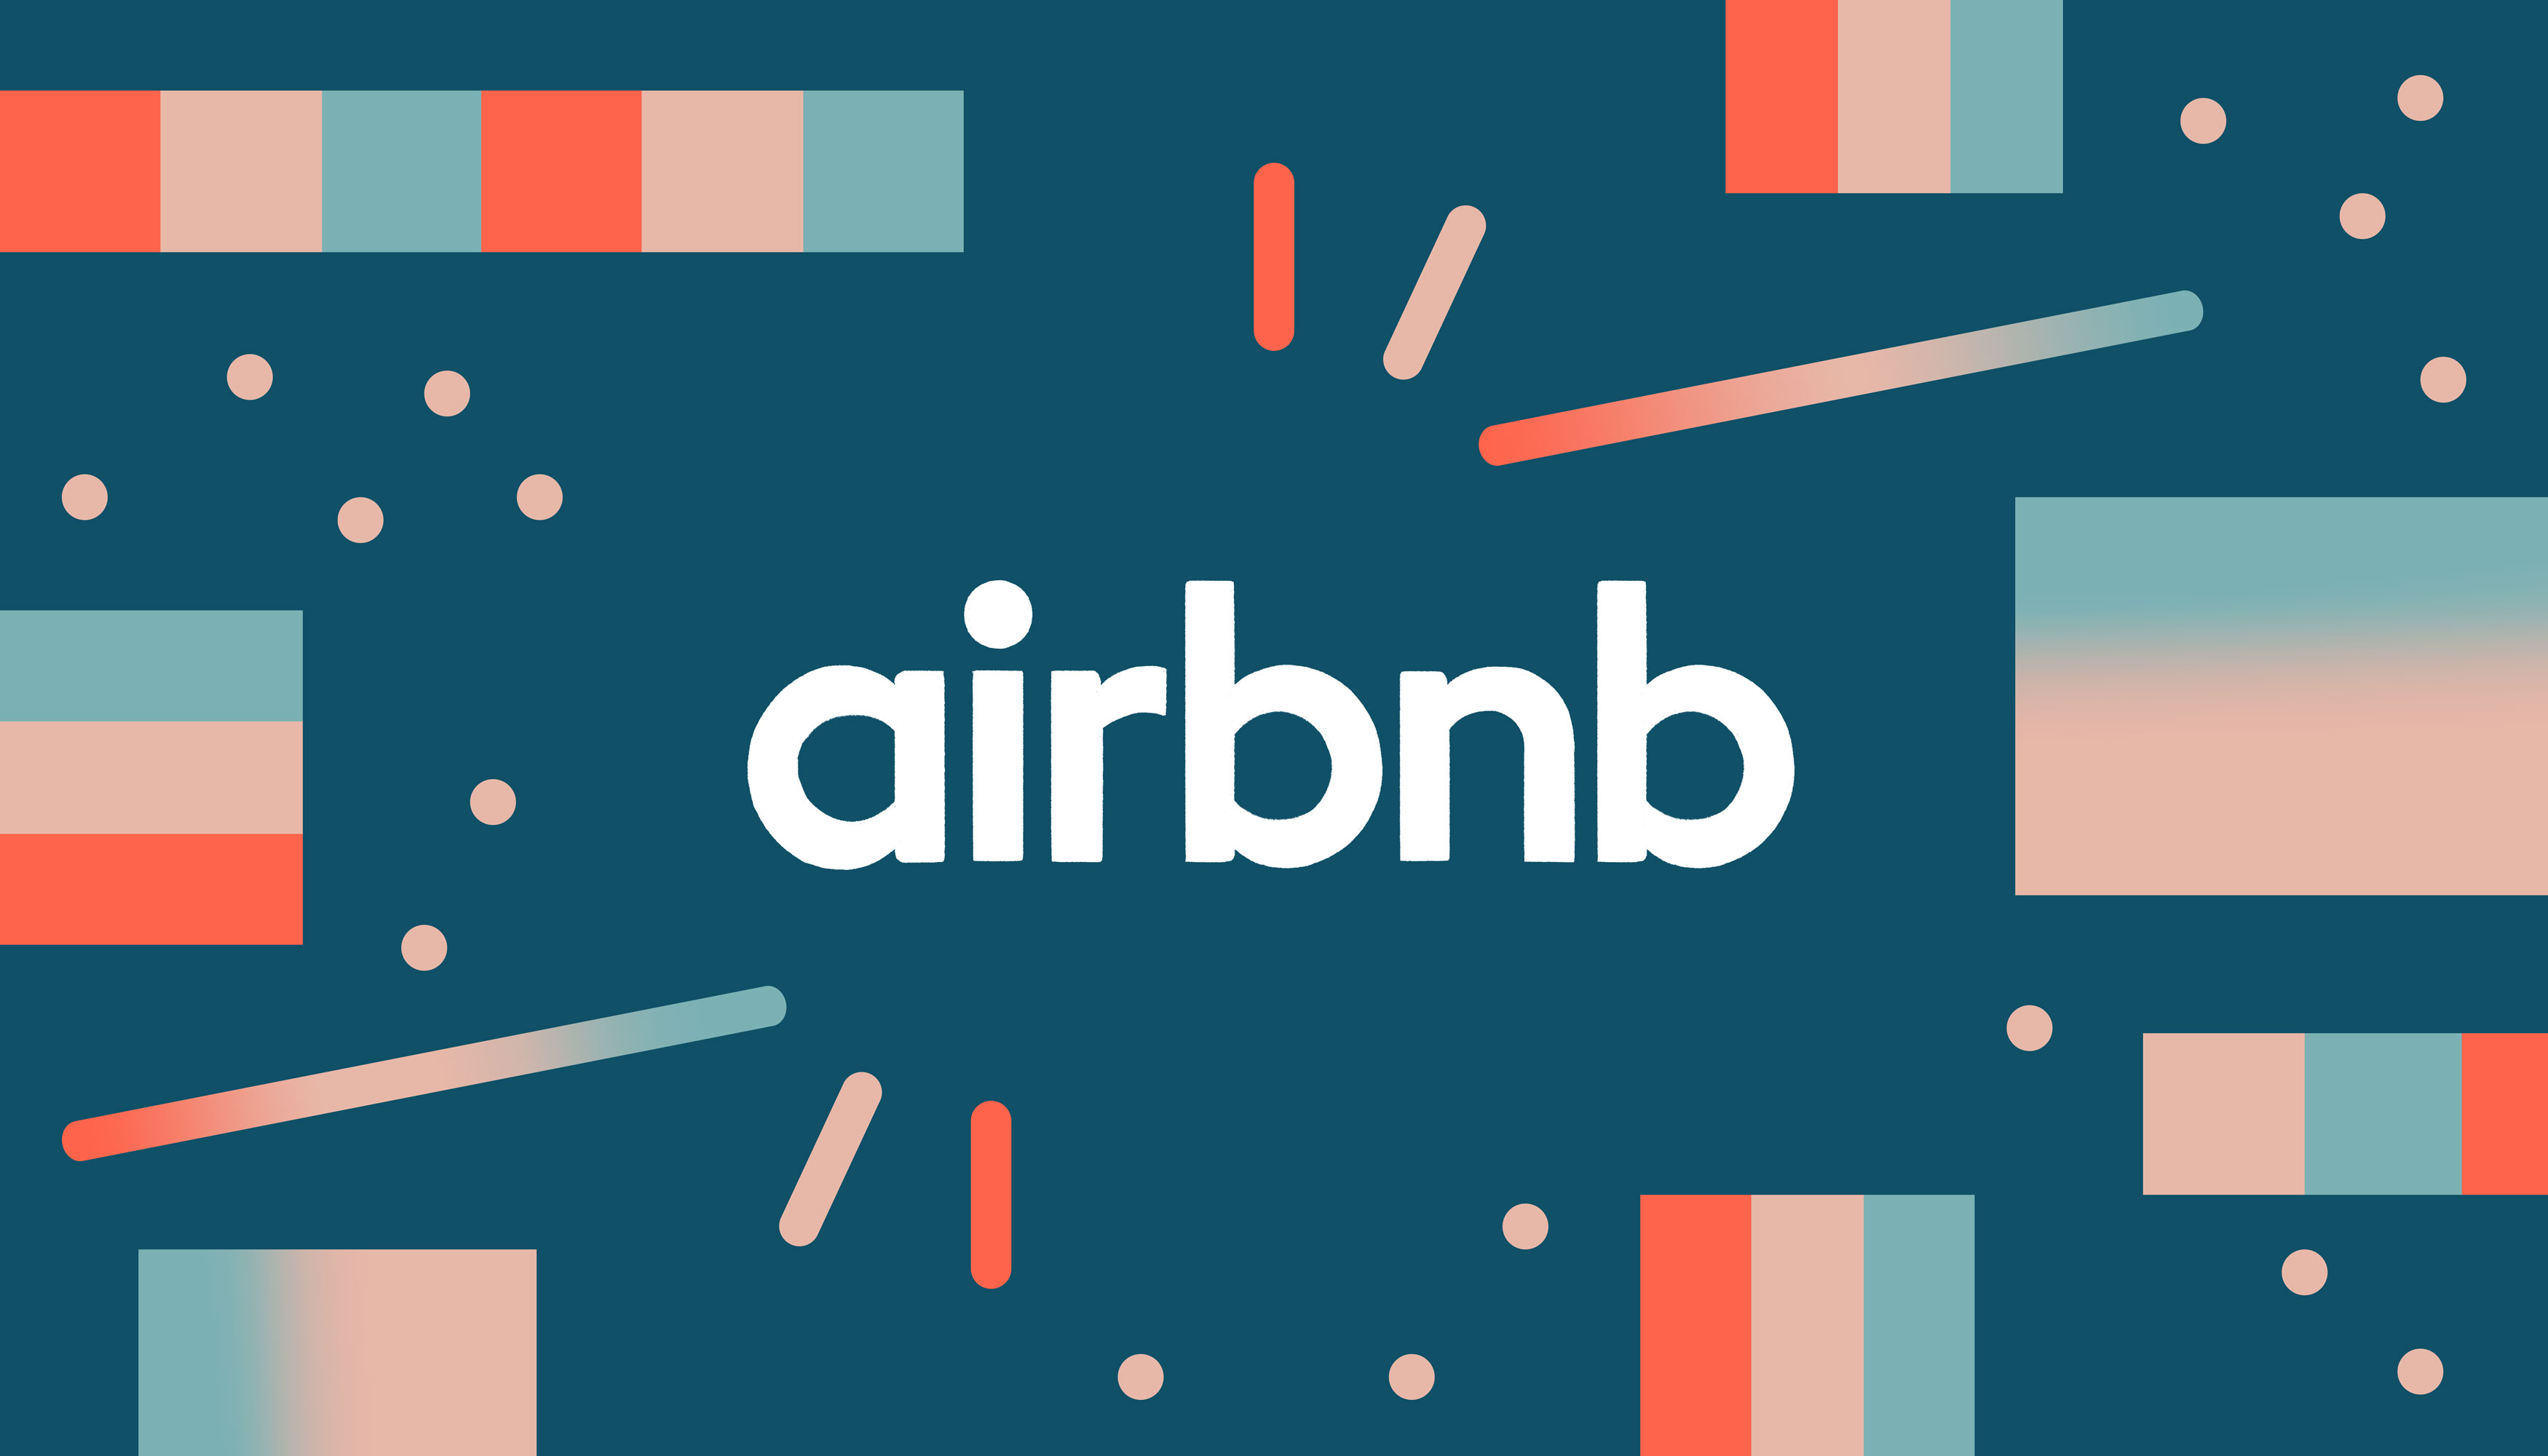 Illustration with text “airbnb” against pink and blue graphics.